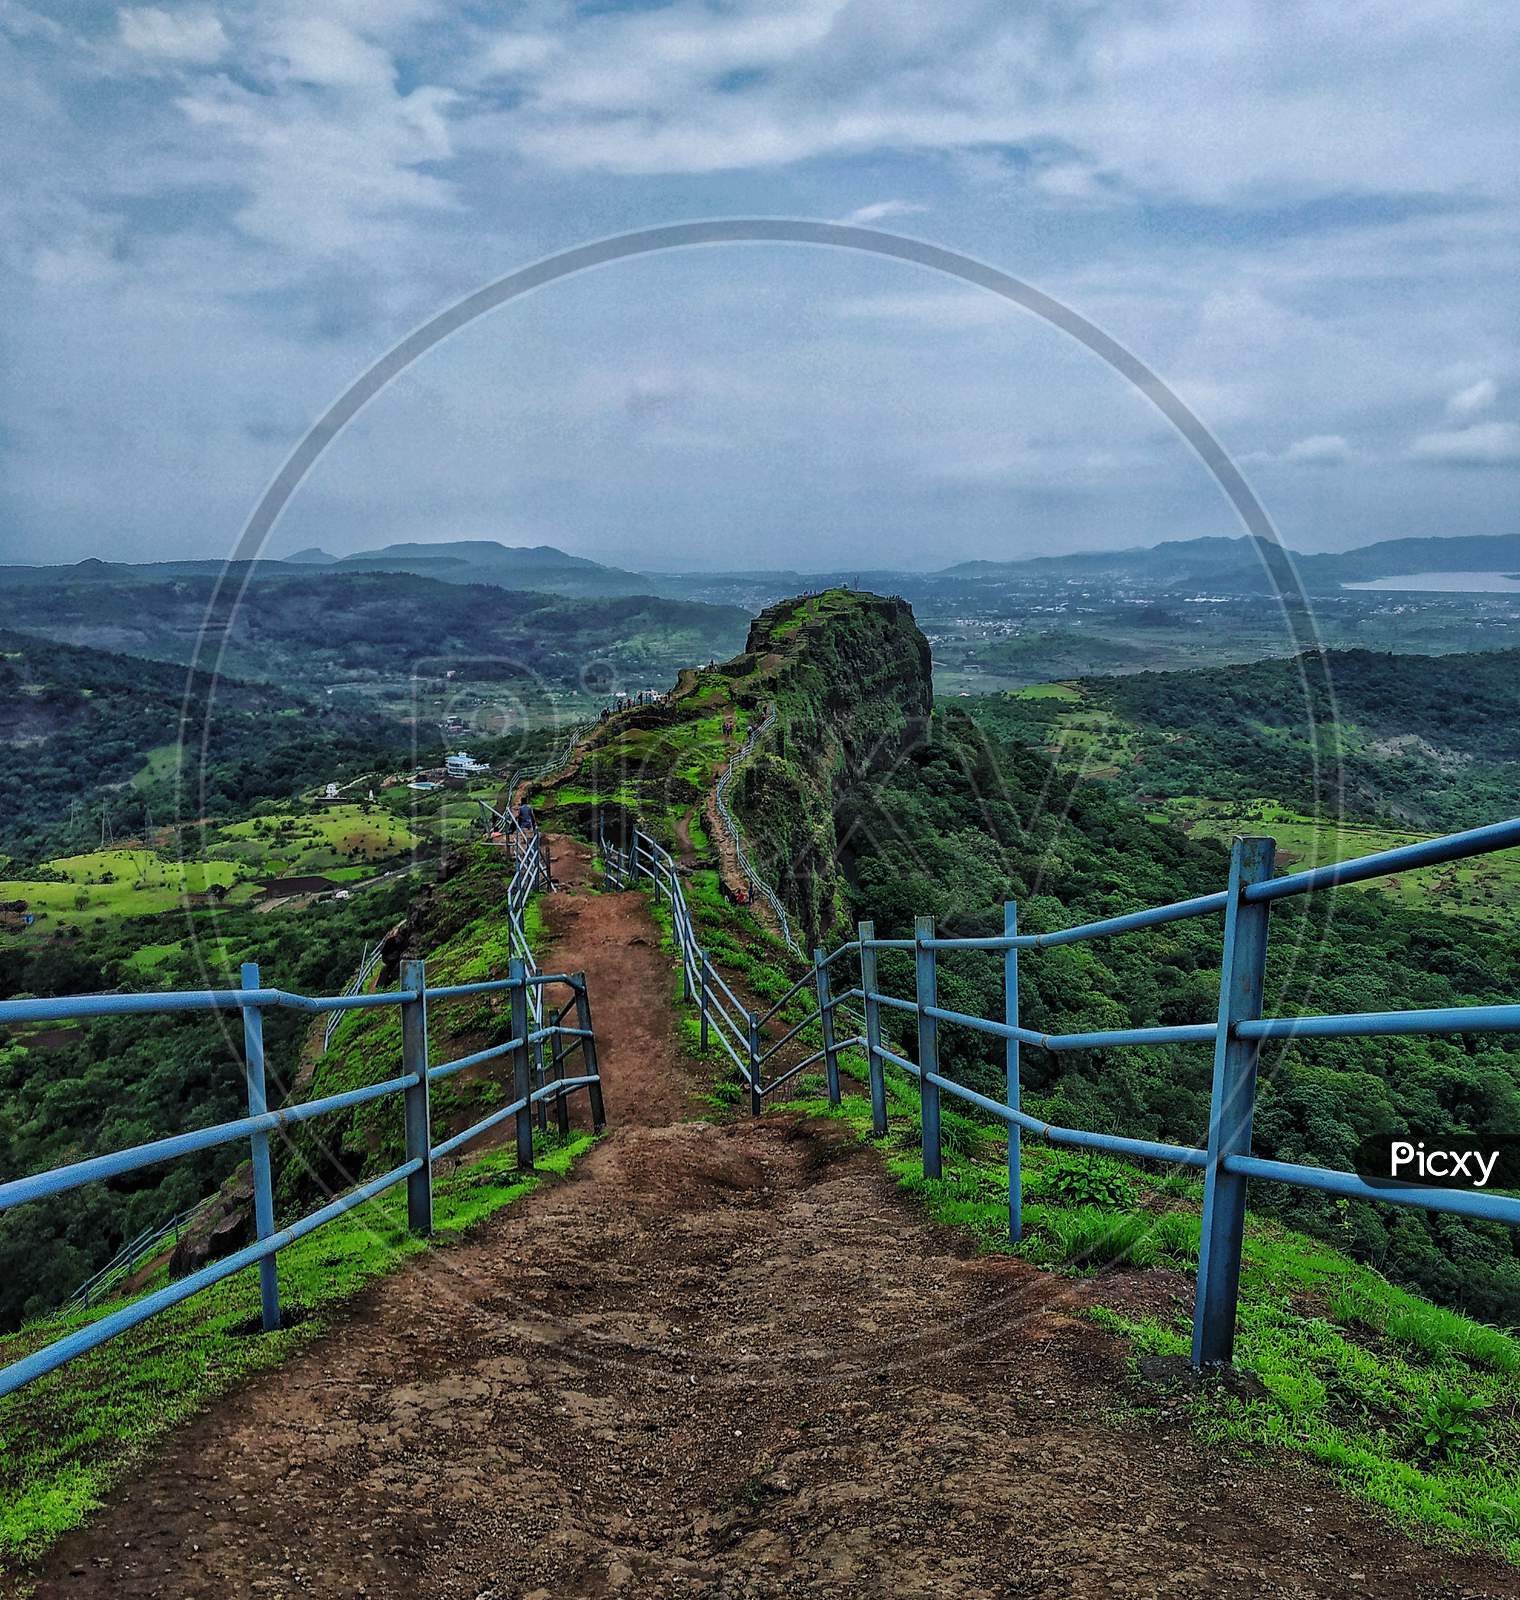 Lohagad , An Ancient Fort Near Pune In Mahahrashtra Having A Blue Railing. A Blue Sky And A Combination Of Some Clouds Creates A Good Landscape Photography Scene.